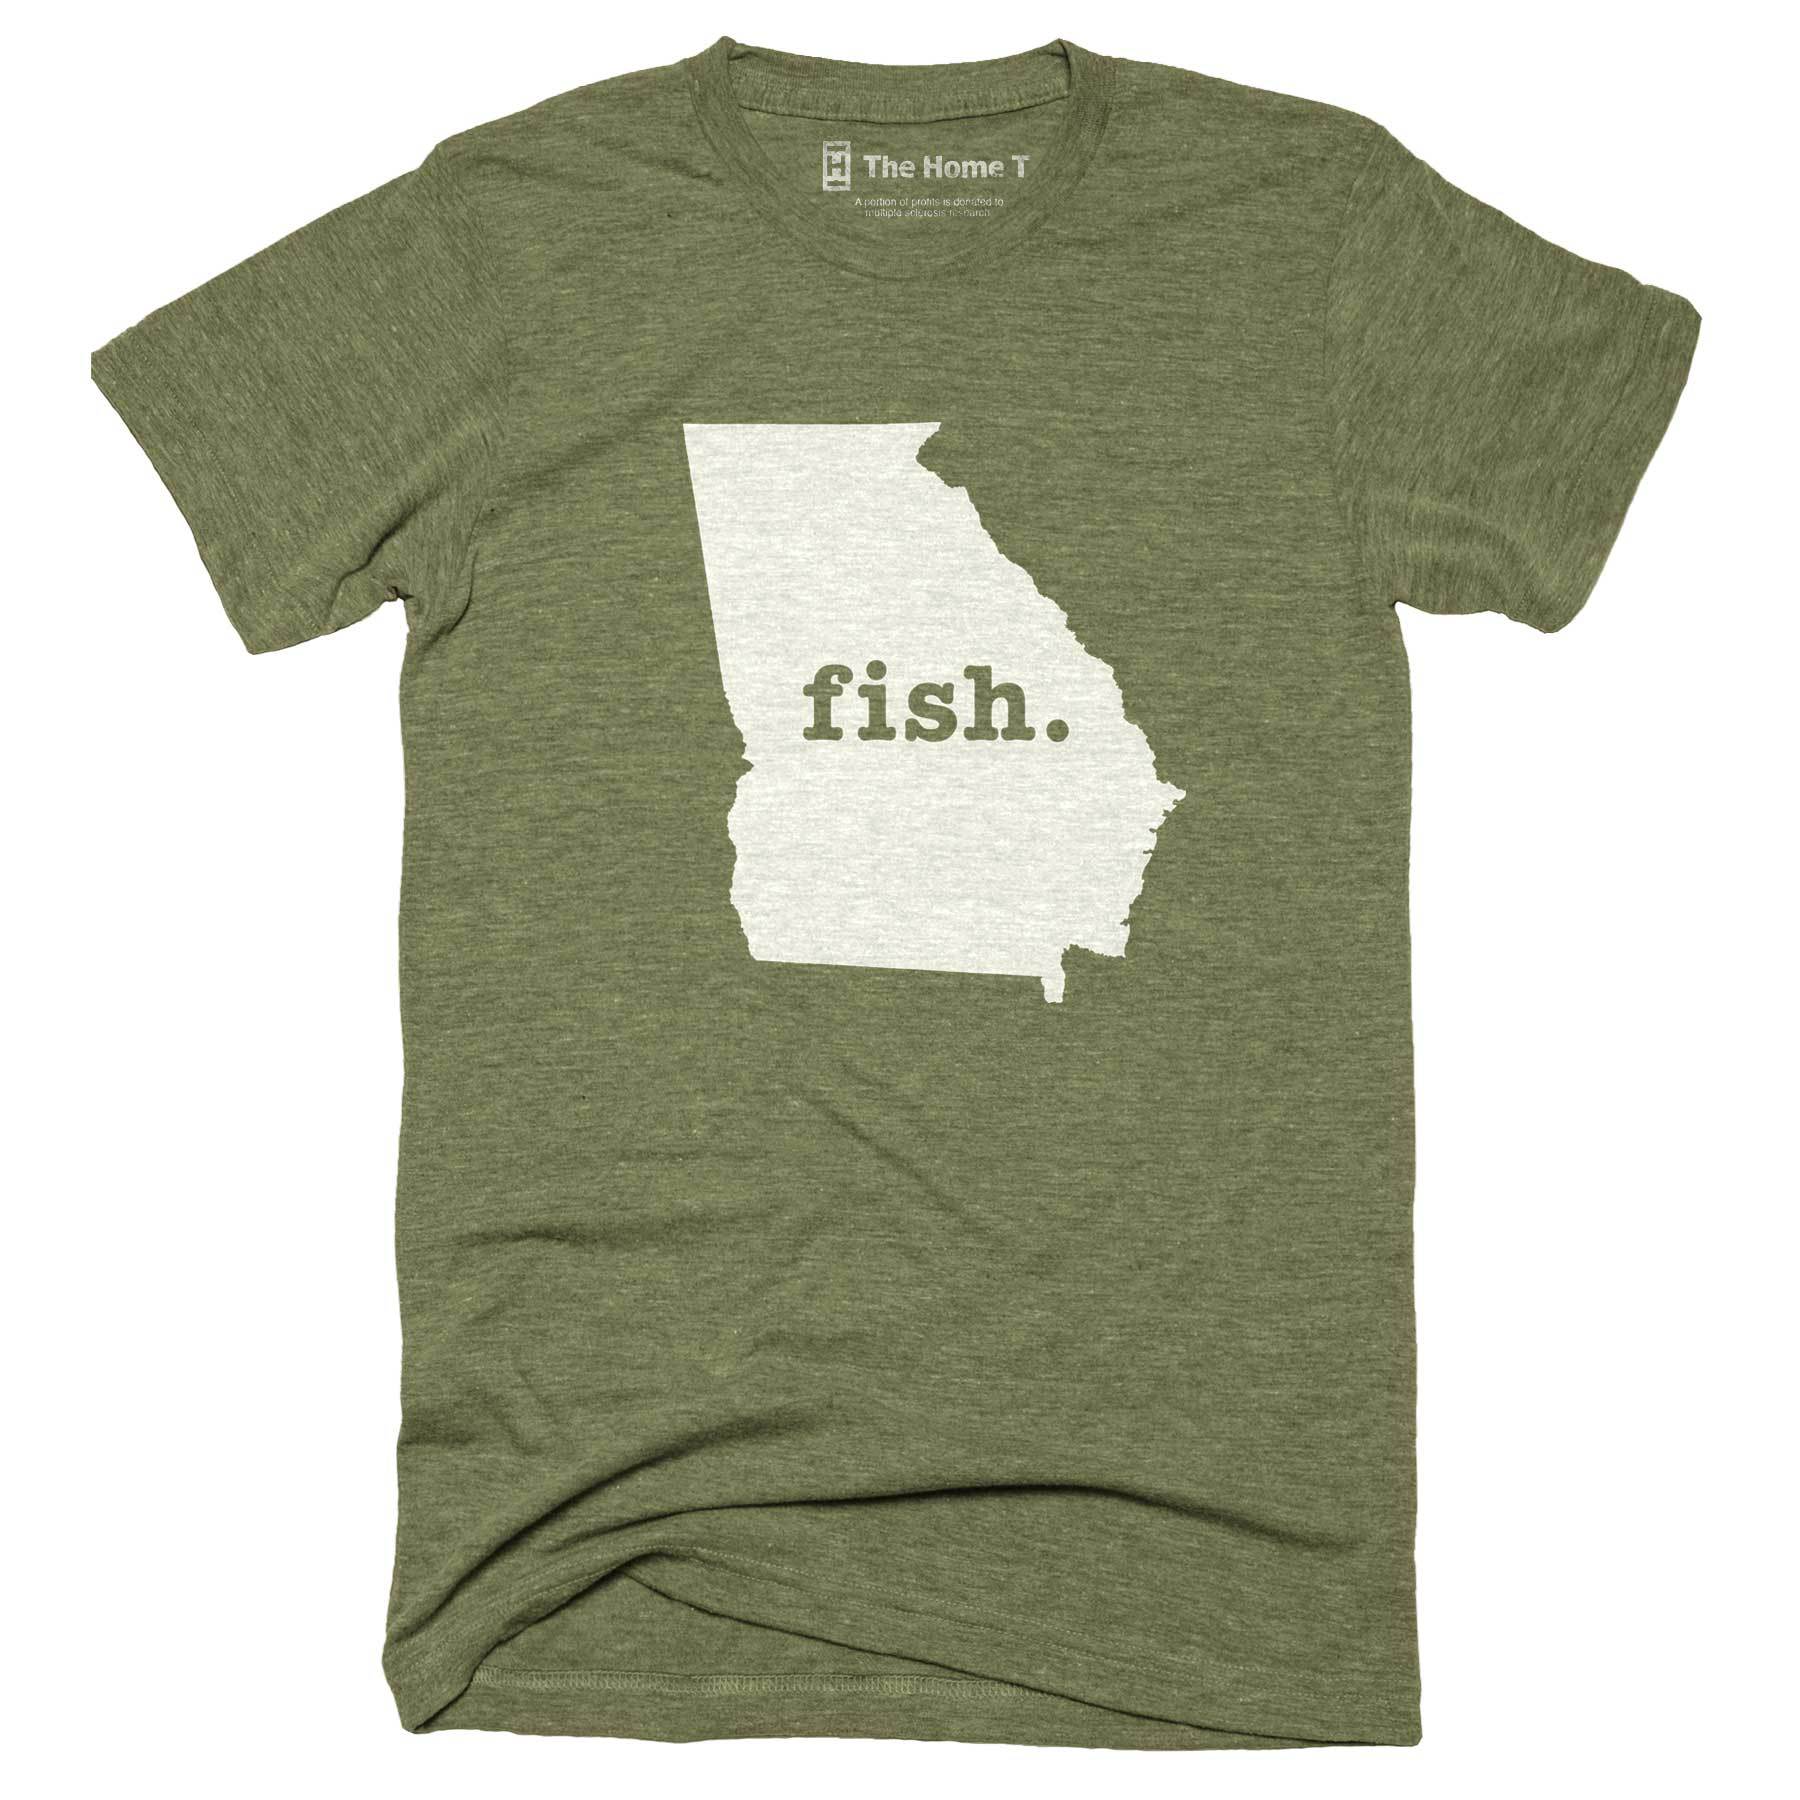 Georgia Fish Home T-Shirt Outdoor Collection The Home T XXL Army Green